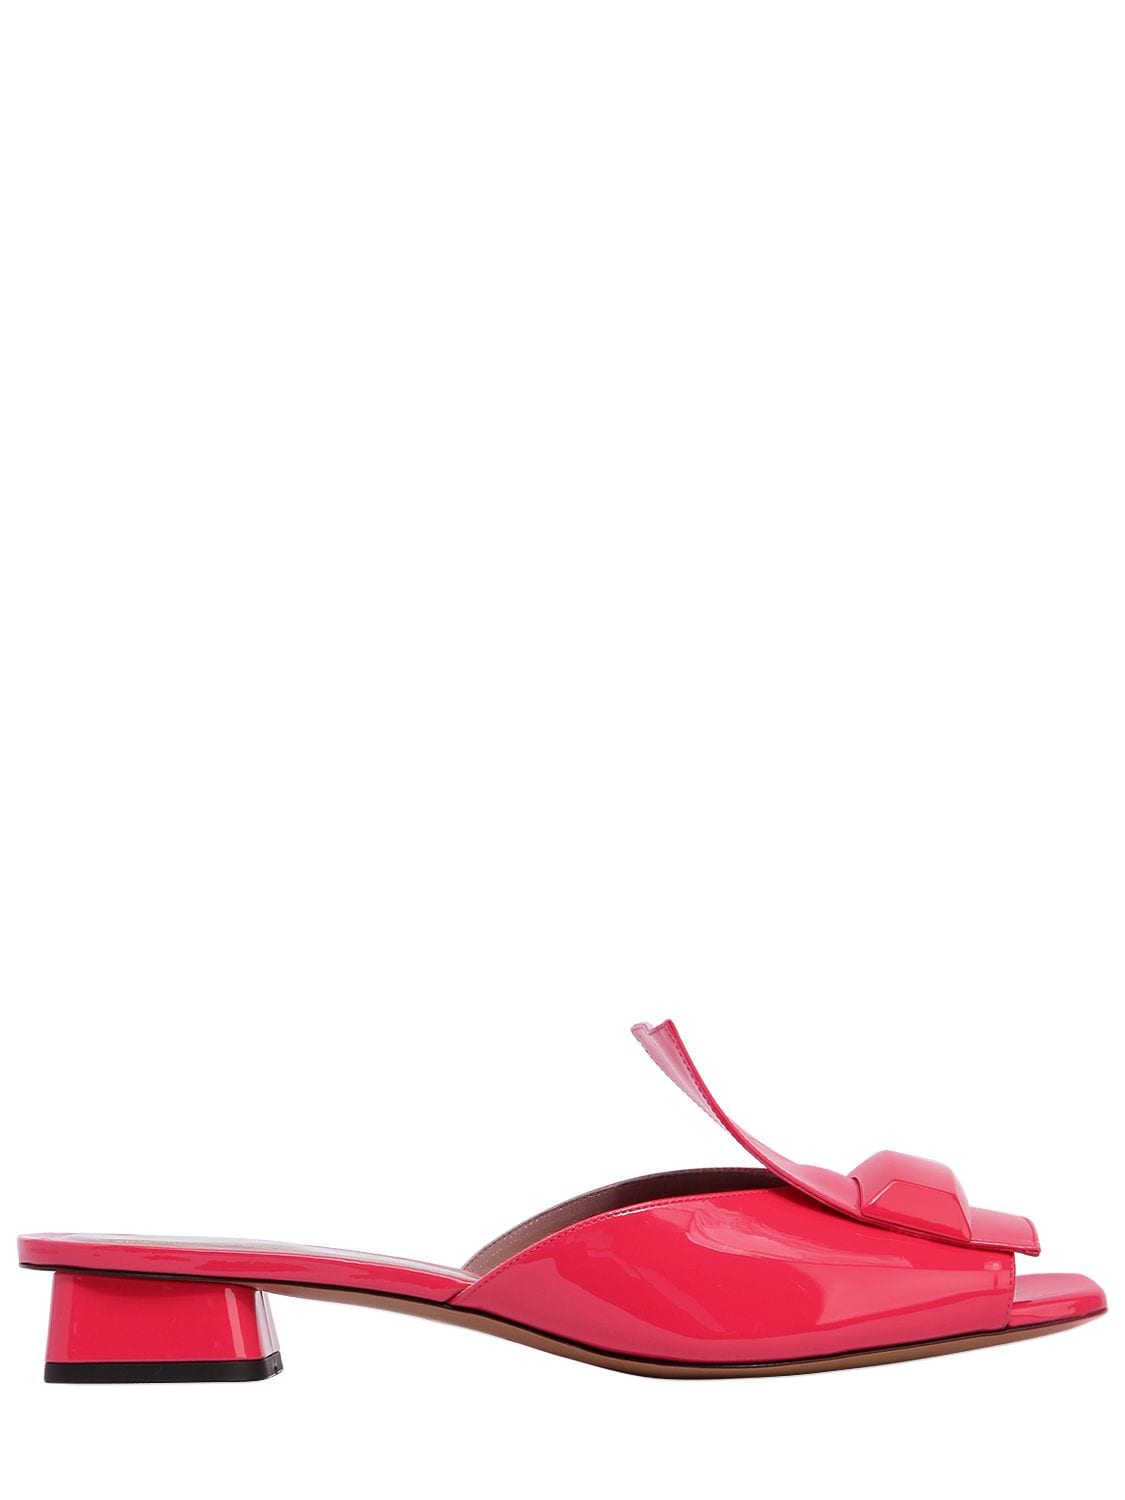 Rayne 30mm Patent Leather Sandals In Fuchsia